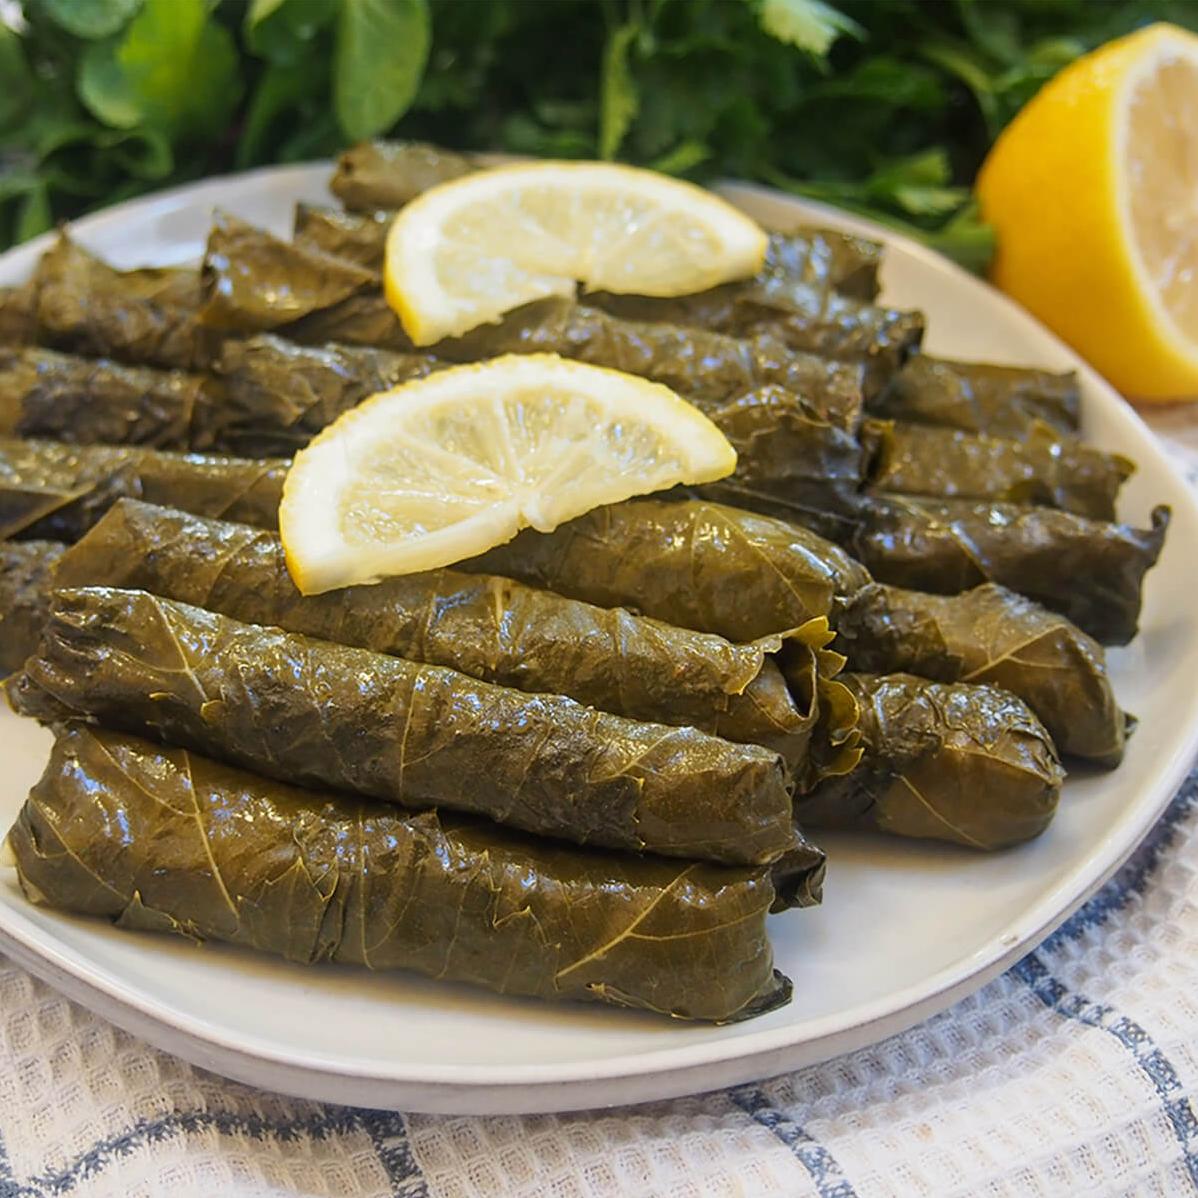  These stuffed vine leaves are like little green packages waiting to be devoured.